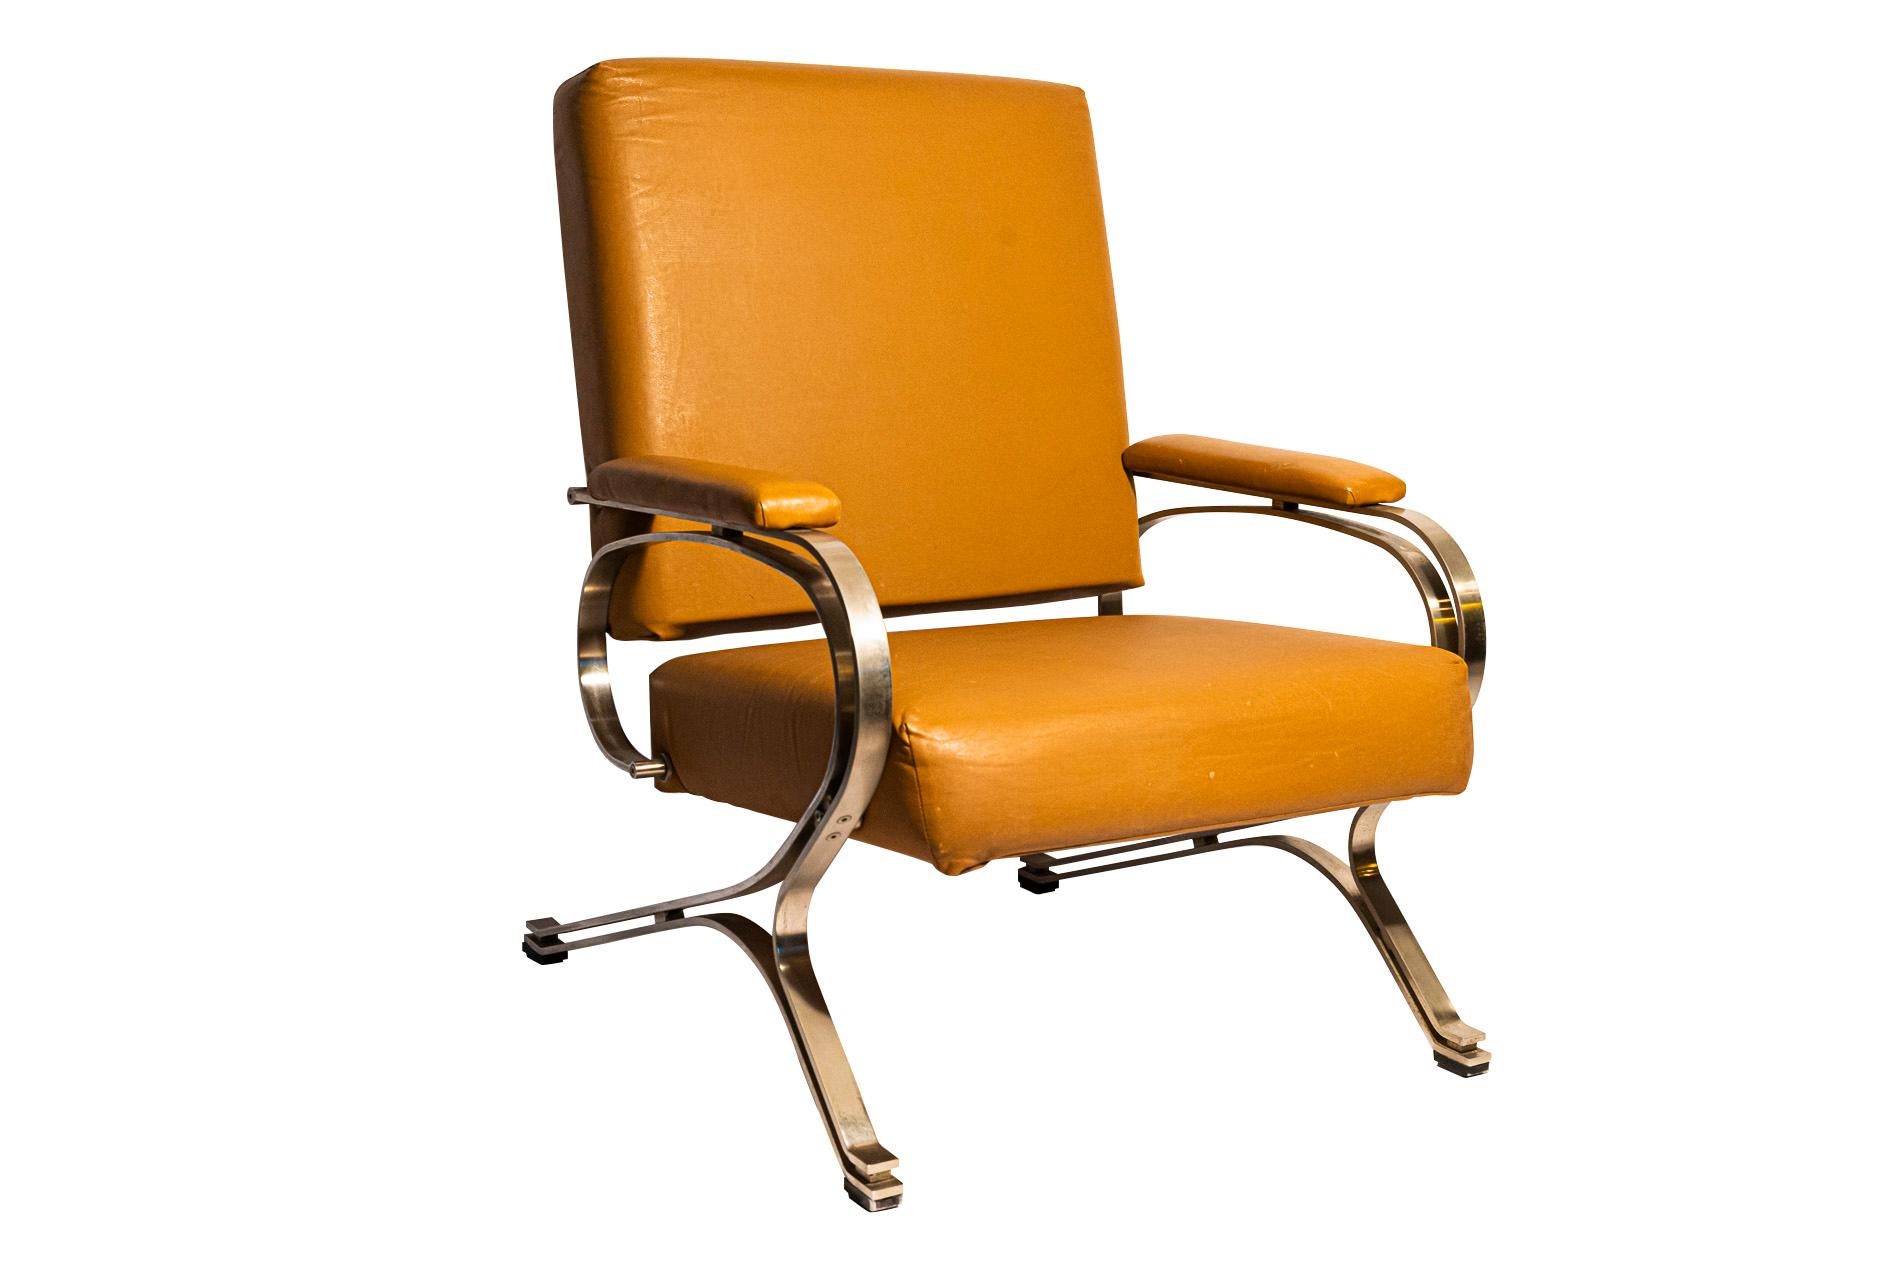 Gianni Moscatelli, Pair of armchairs,
Model Micaela, Production Formanova,
Steel and leather,
Labeled by the manufacturer,
circa 1970, Italy.

Measures: Height 94 cm, width 71 cm, depth 80 cm, seat height 38 cm.